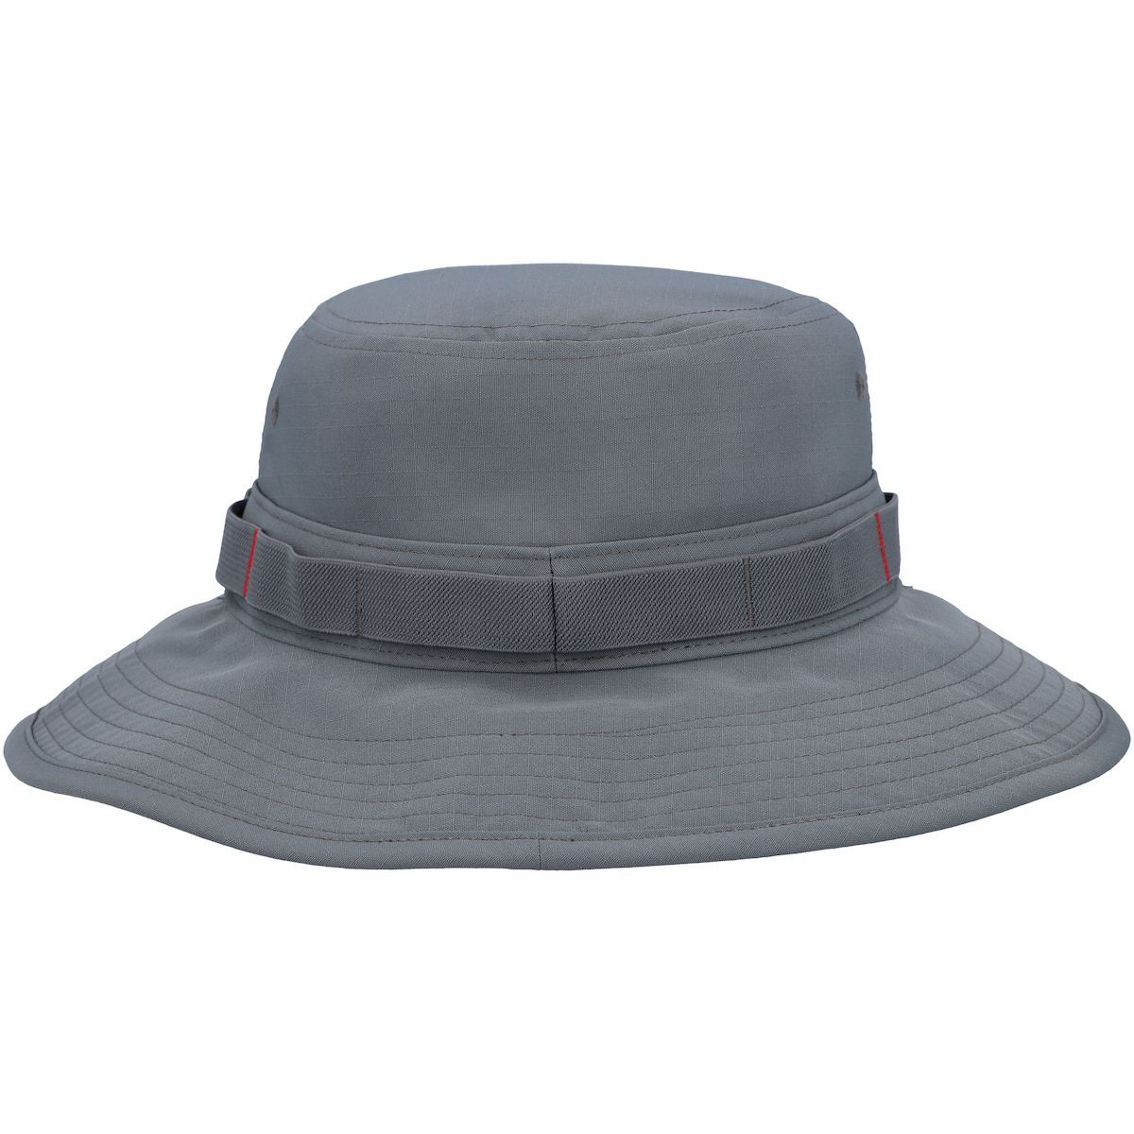 Nike Men's Gray Canada Soccer Boonie Tri-Blend Performance Bucket Hat - Image 3 of 3